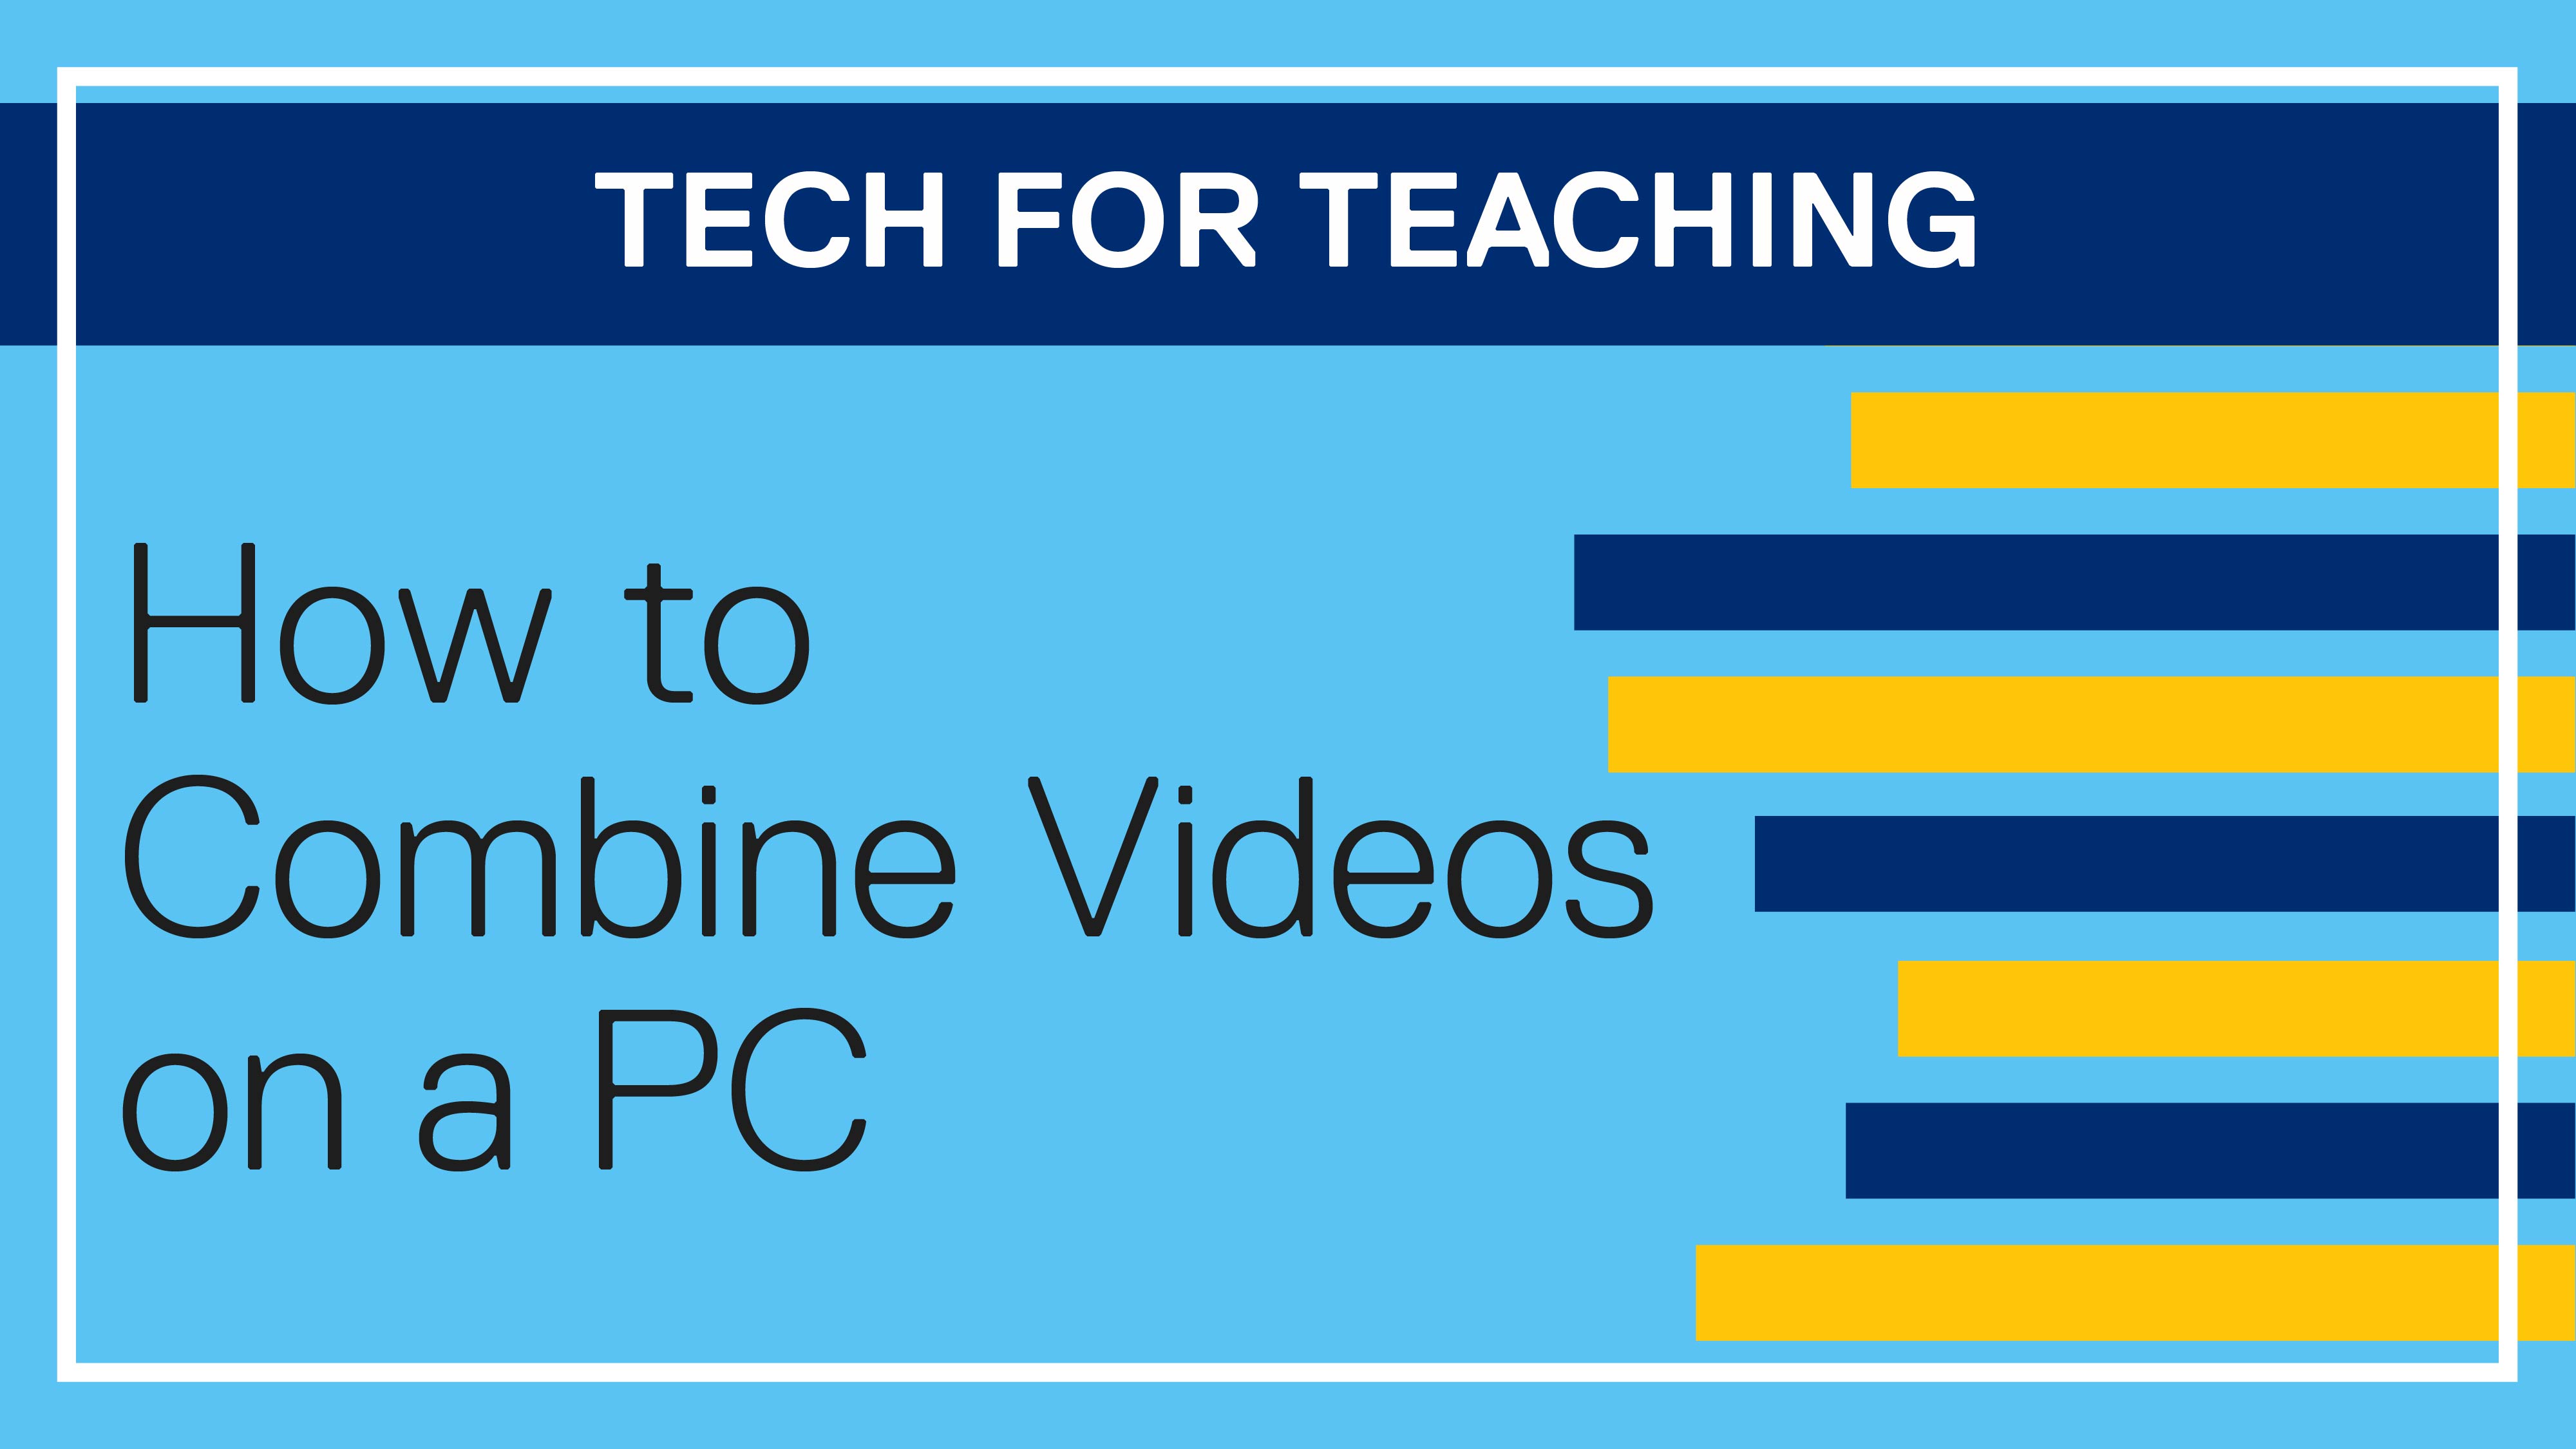 Tech for Teaching: How to Combine Videos on a PC